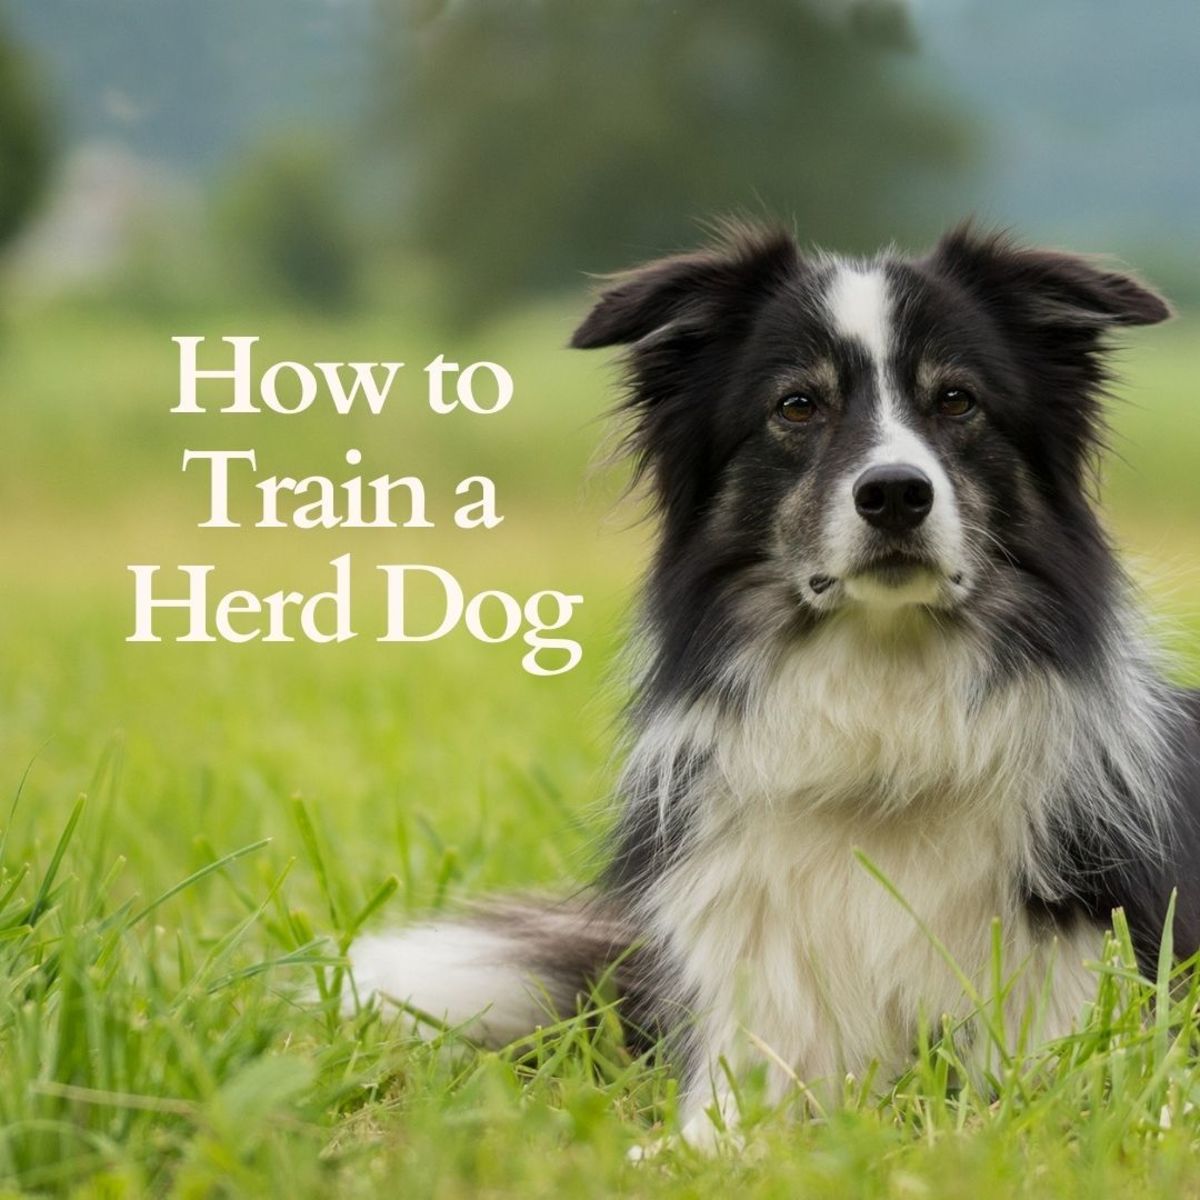 Tips for Training a Herd Dog